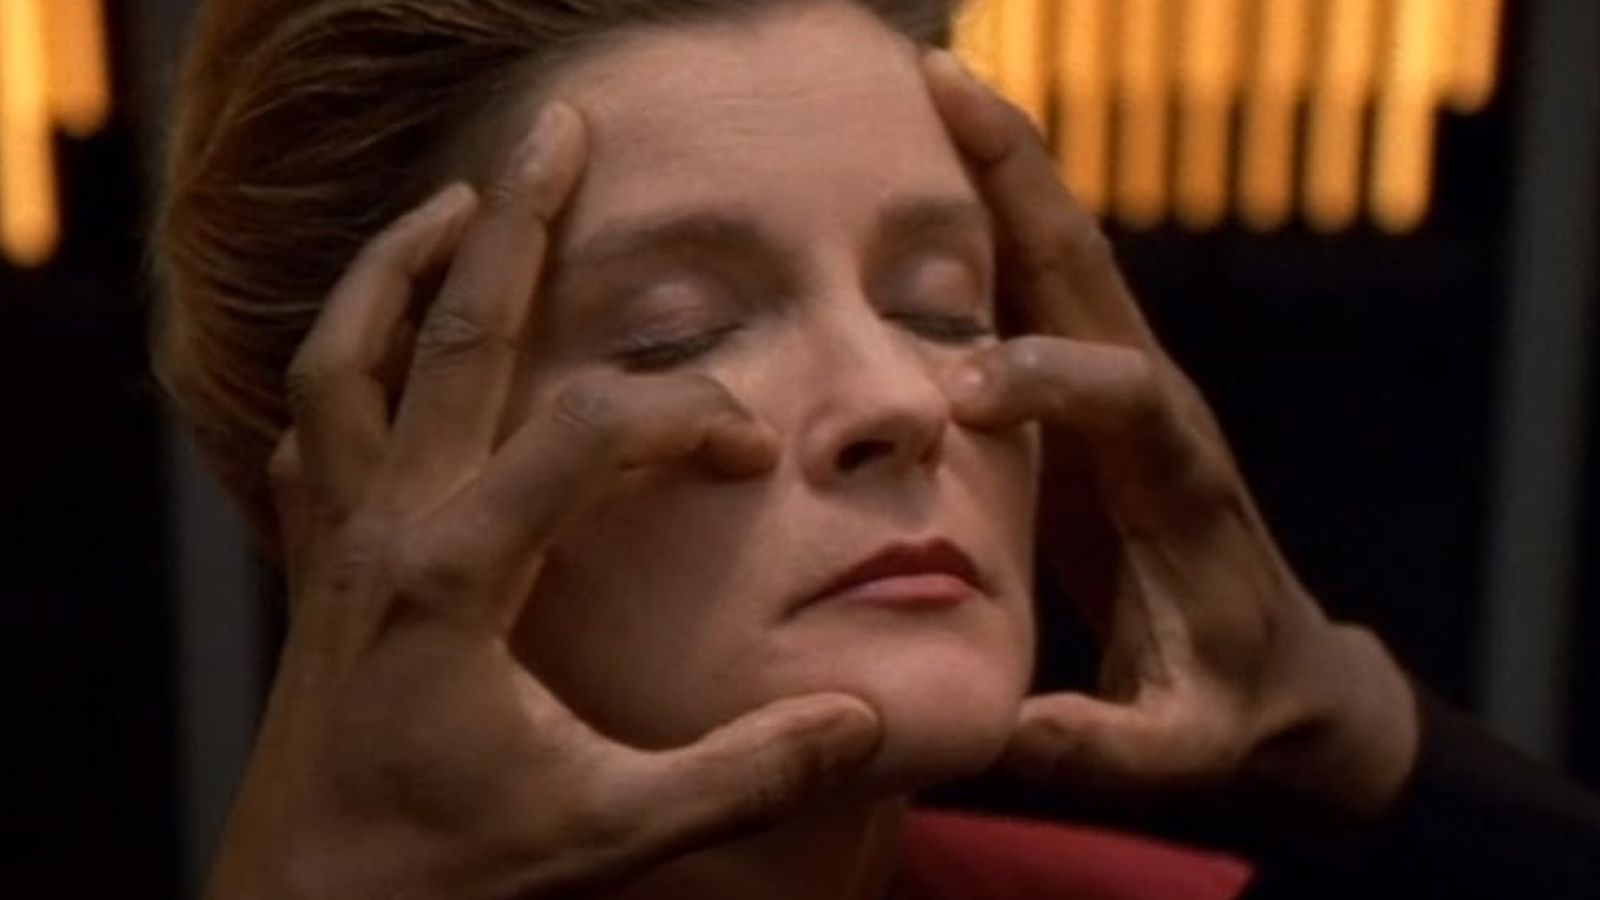 <span>In 1995, Captain Janeway took over our screens as the first female lead of </span><a class="editor-rtfLink" href="https://www.imdb.com/title/tt0112178/" rel="noopener"><span>Star Trek Voyager, boldly going</span></a><span> where no man (or woman) had gone before.</span>  <span>There was a massive backlash from fans and the media about the audacity of having a female Captain in Star Trek and how it wouldn’t work.</span>  <span>Somehow, in 2024, it feels hard to believe such a narrative existed, but sadly, it did. </span>